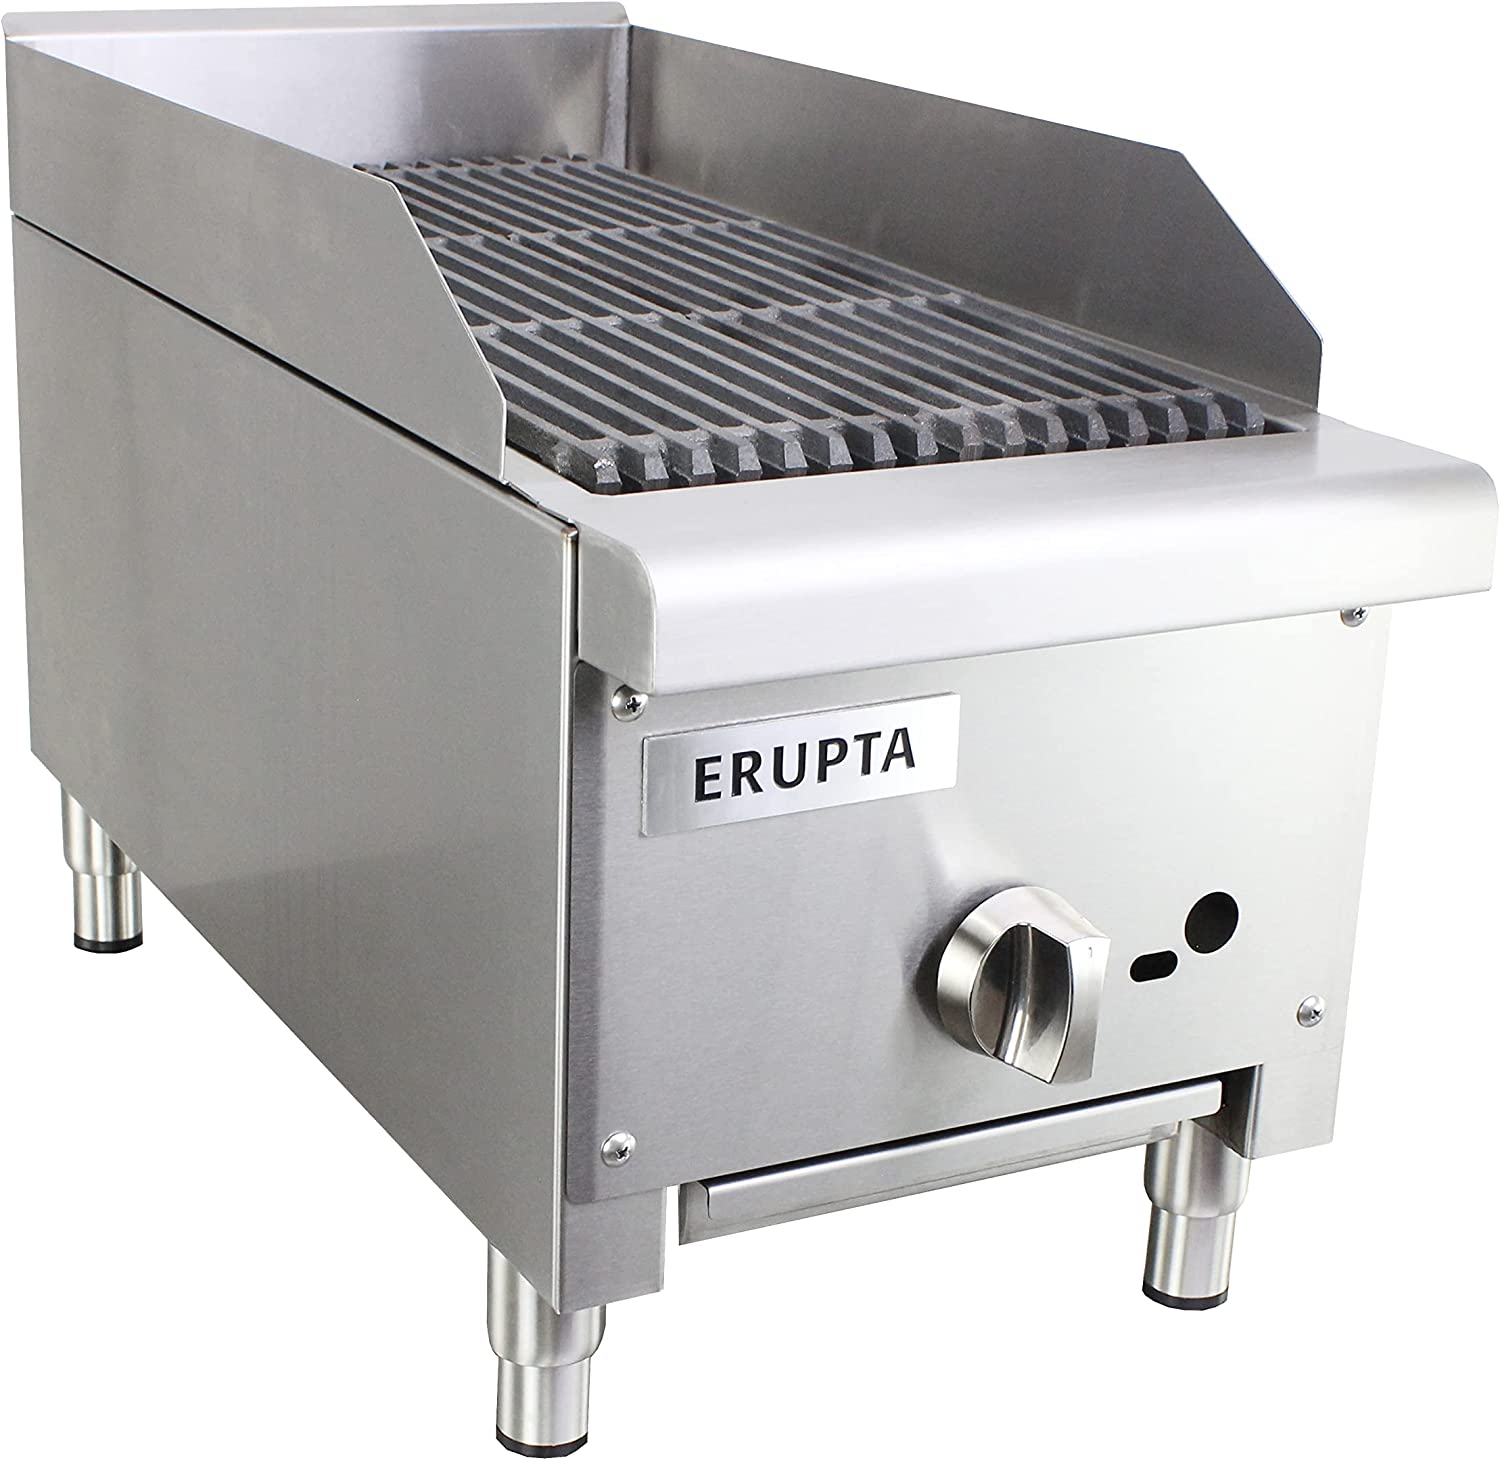 Commercial Grills: Flat Tops, Charbroilers, & More